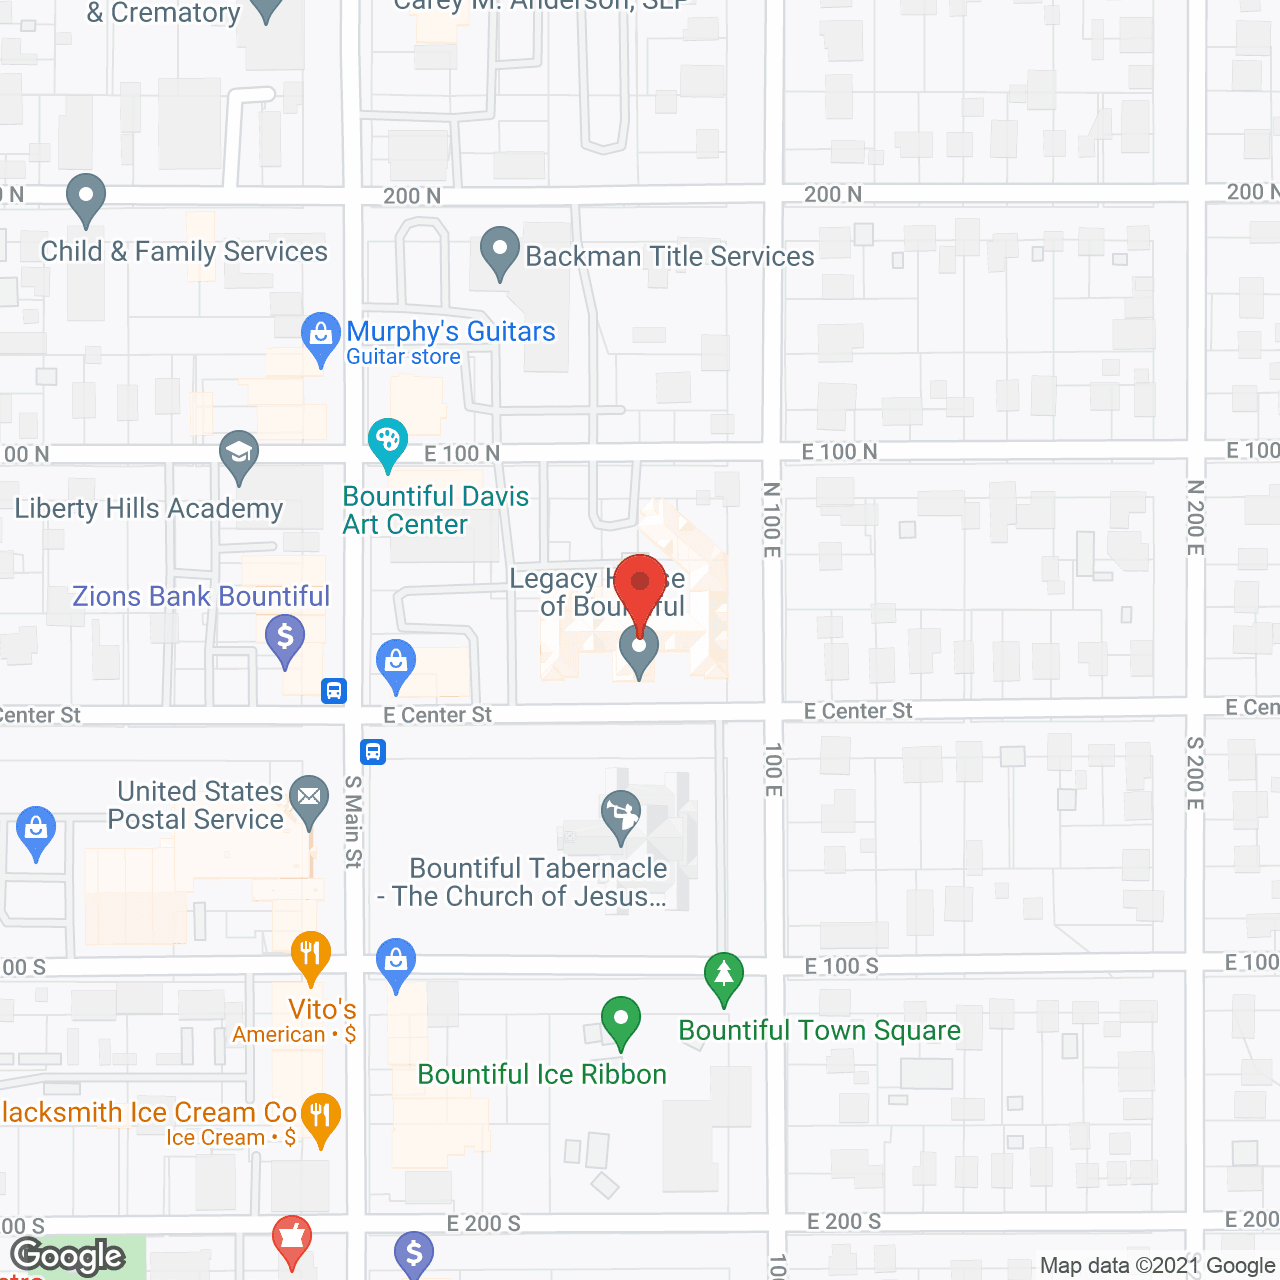 Legacy House of Bountiful in google map